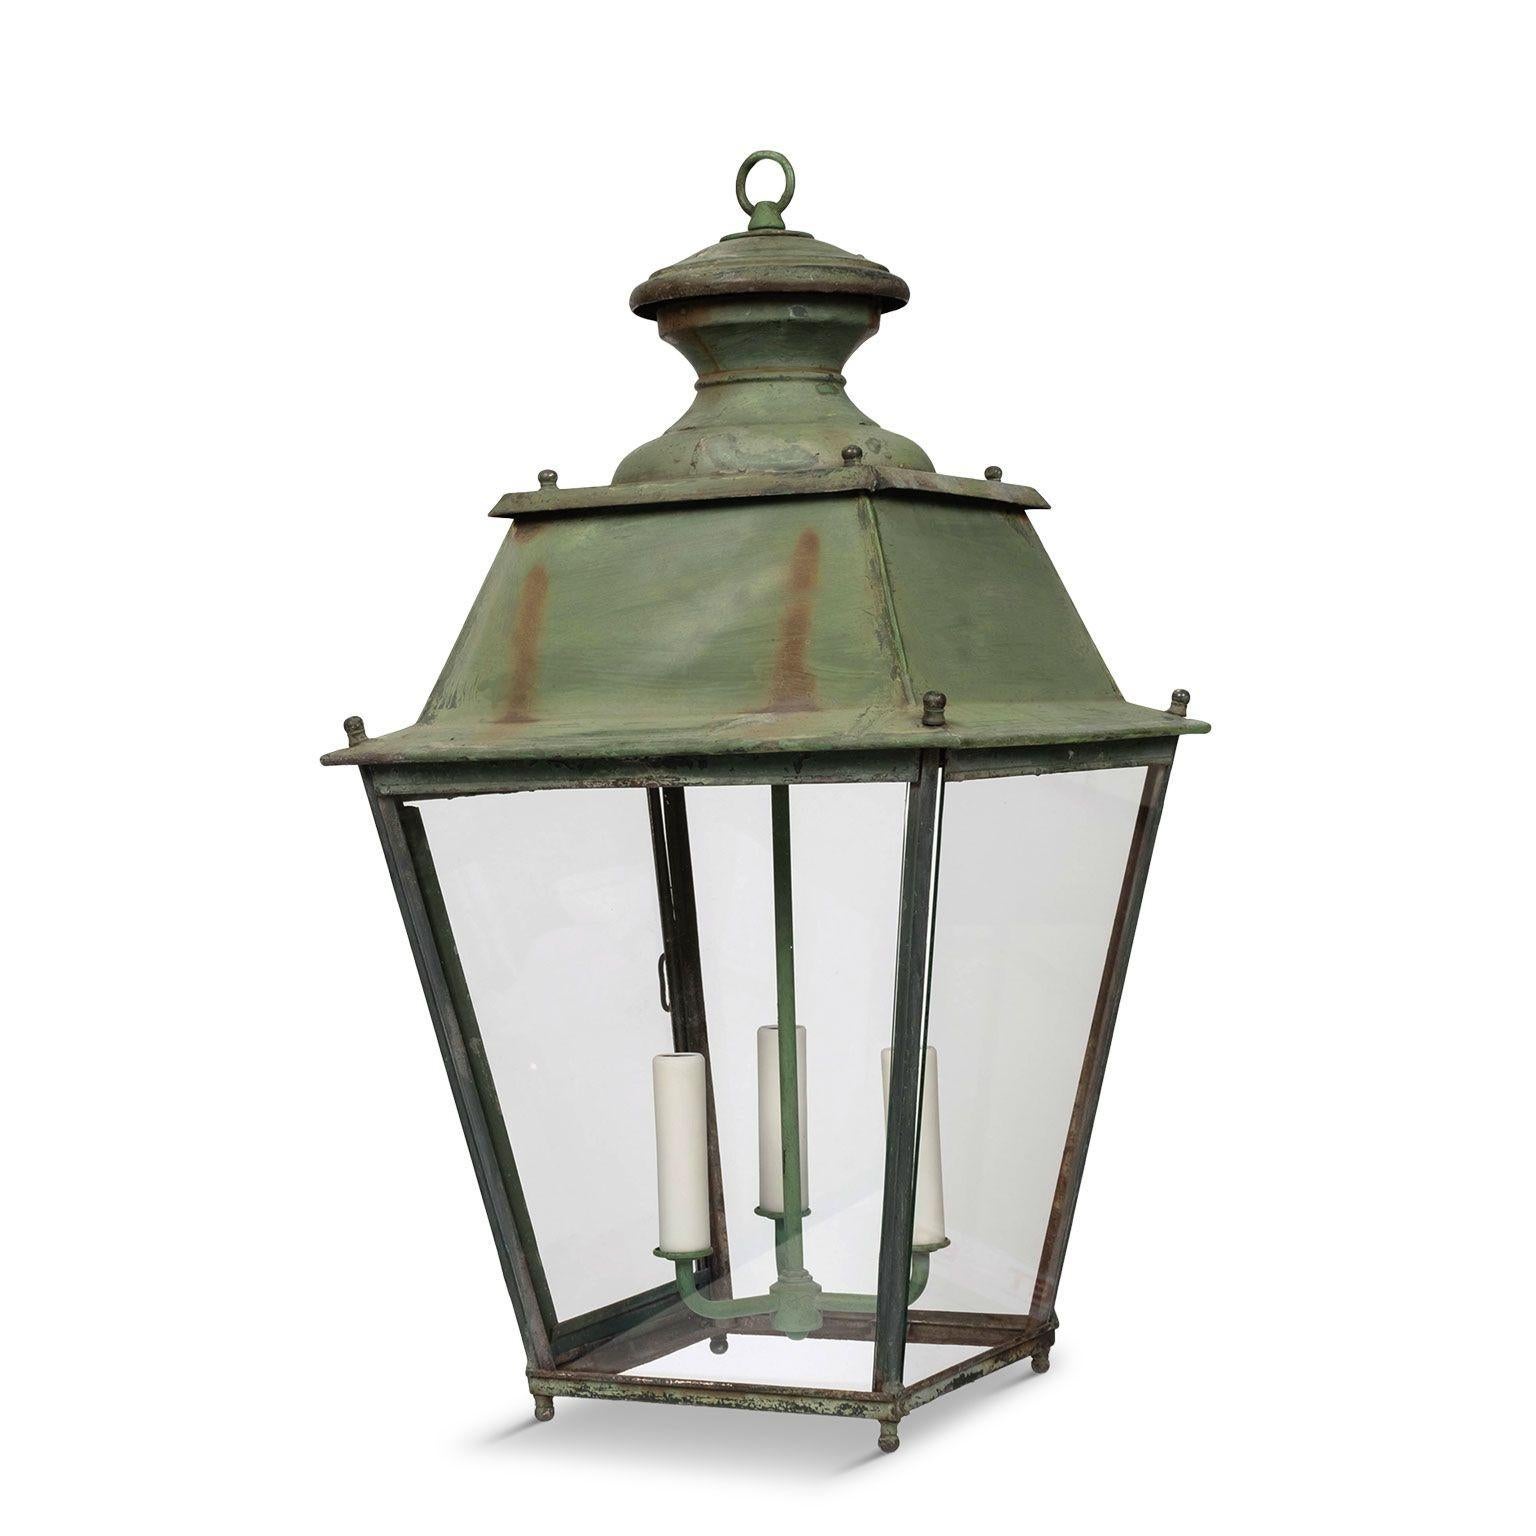 Green-painted French glass paneled iron lantern circa 1900-1930. Newly wired with a drop-cluster of three candelabra lights. Includes chain and a canopy (listed measurements do not include chain).